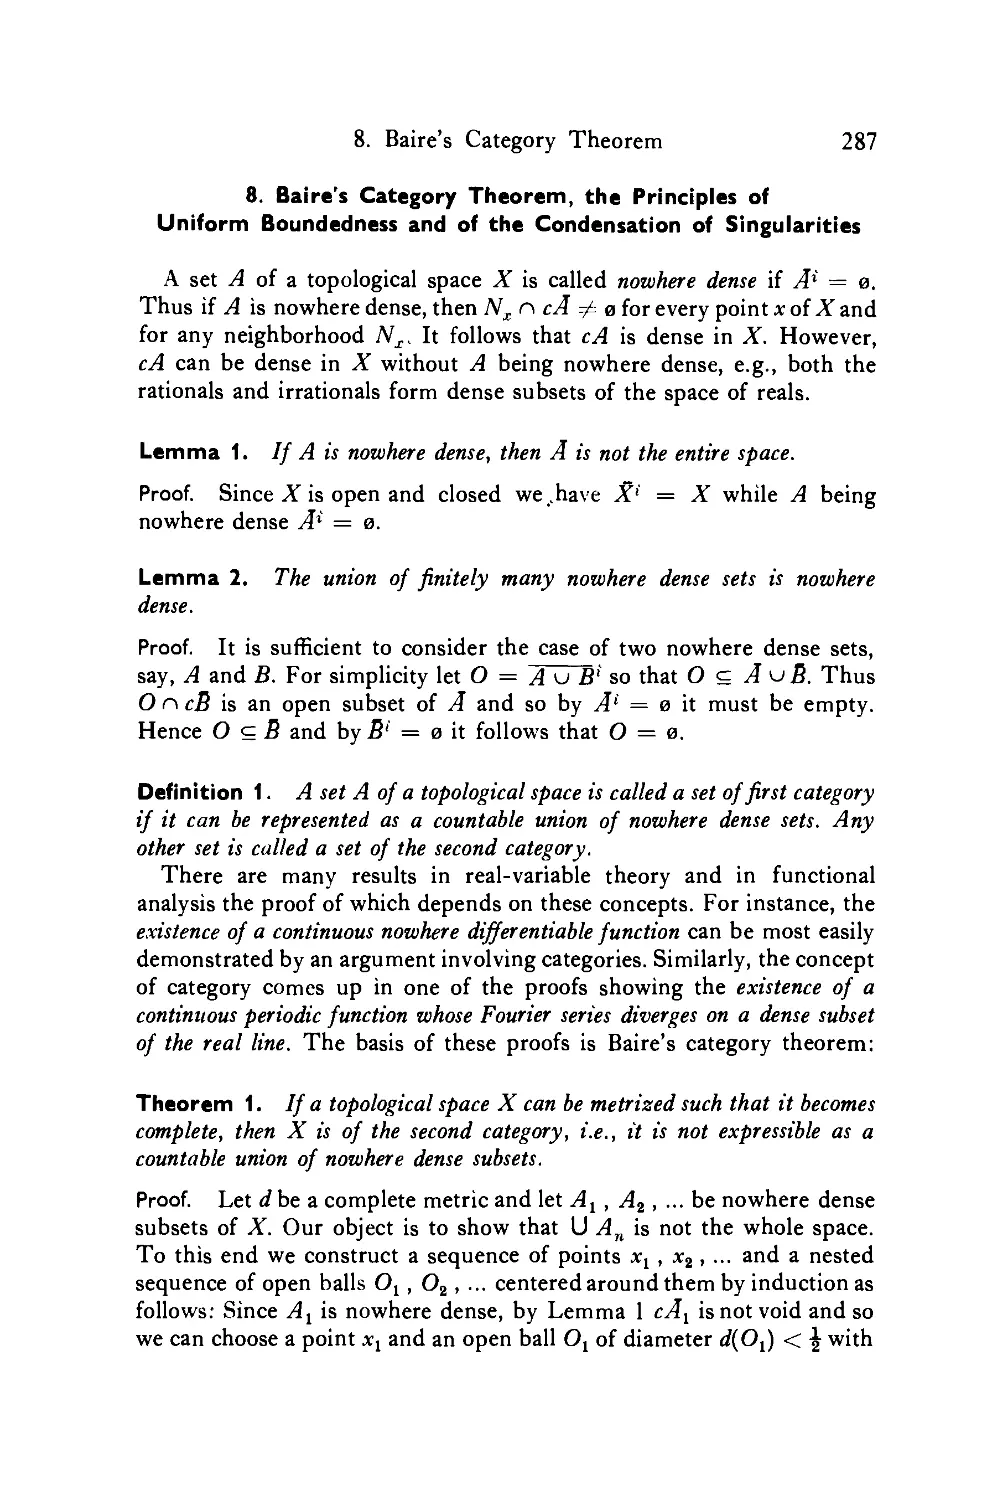 8. Baire's Category Theorem, the Principles of Uniform Boundedness and of the Condensation of Singularities